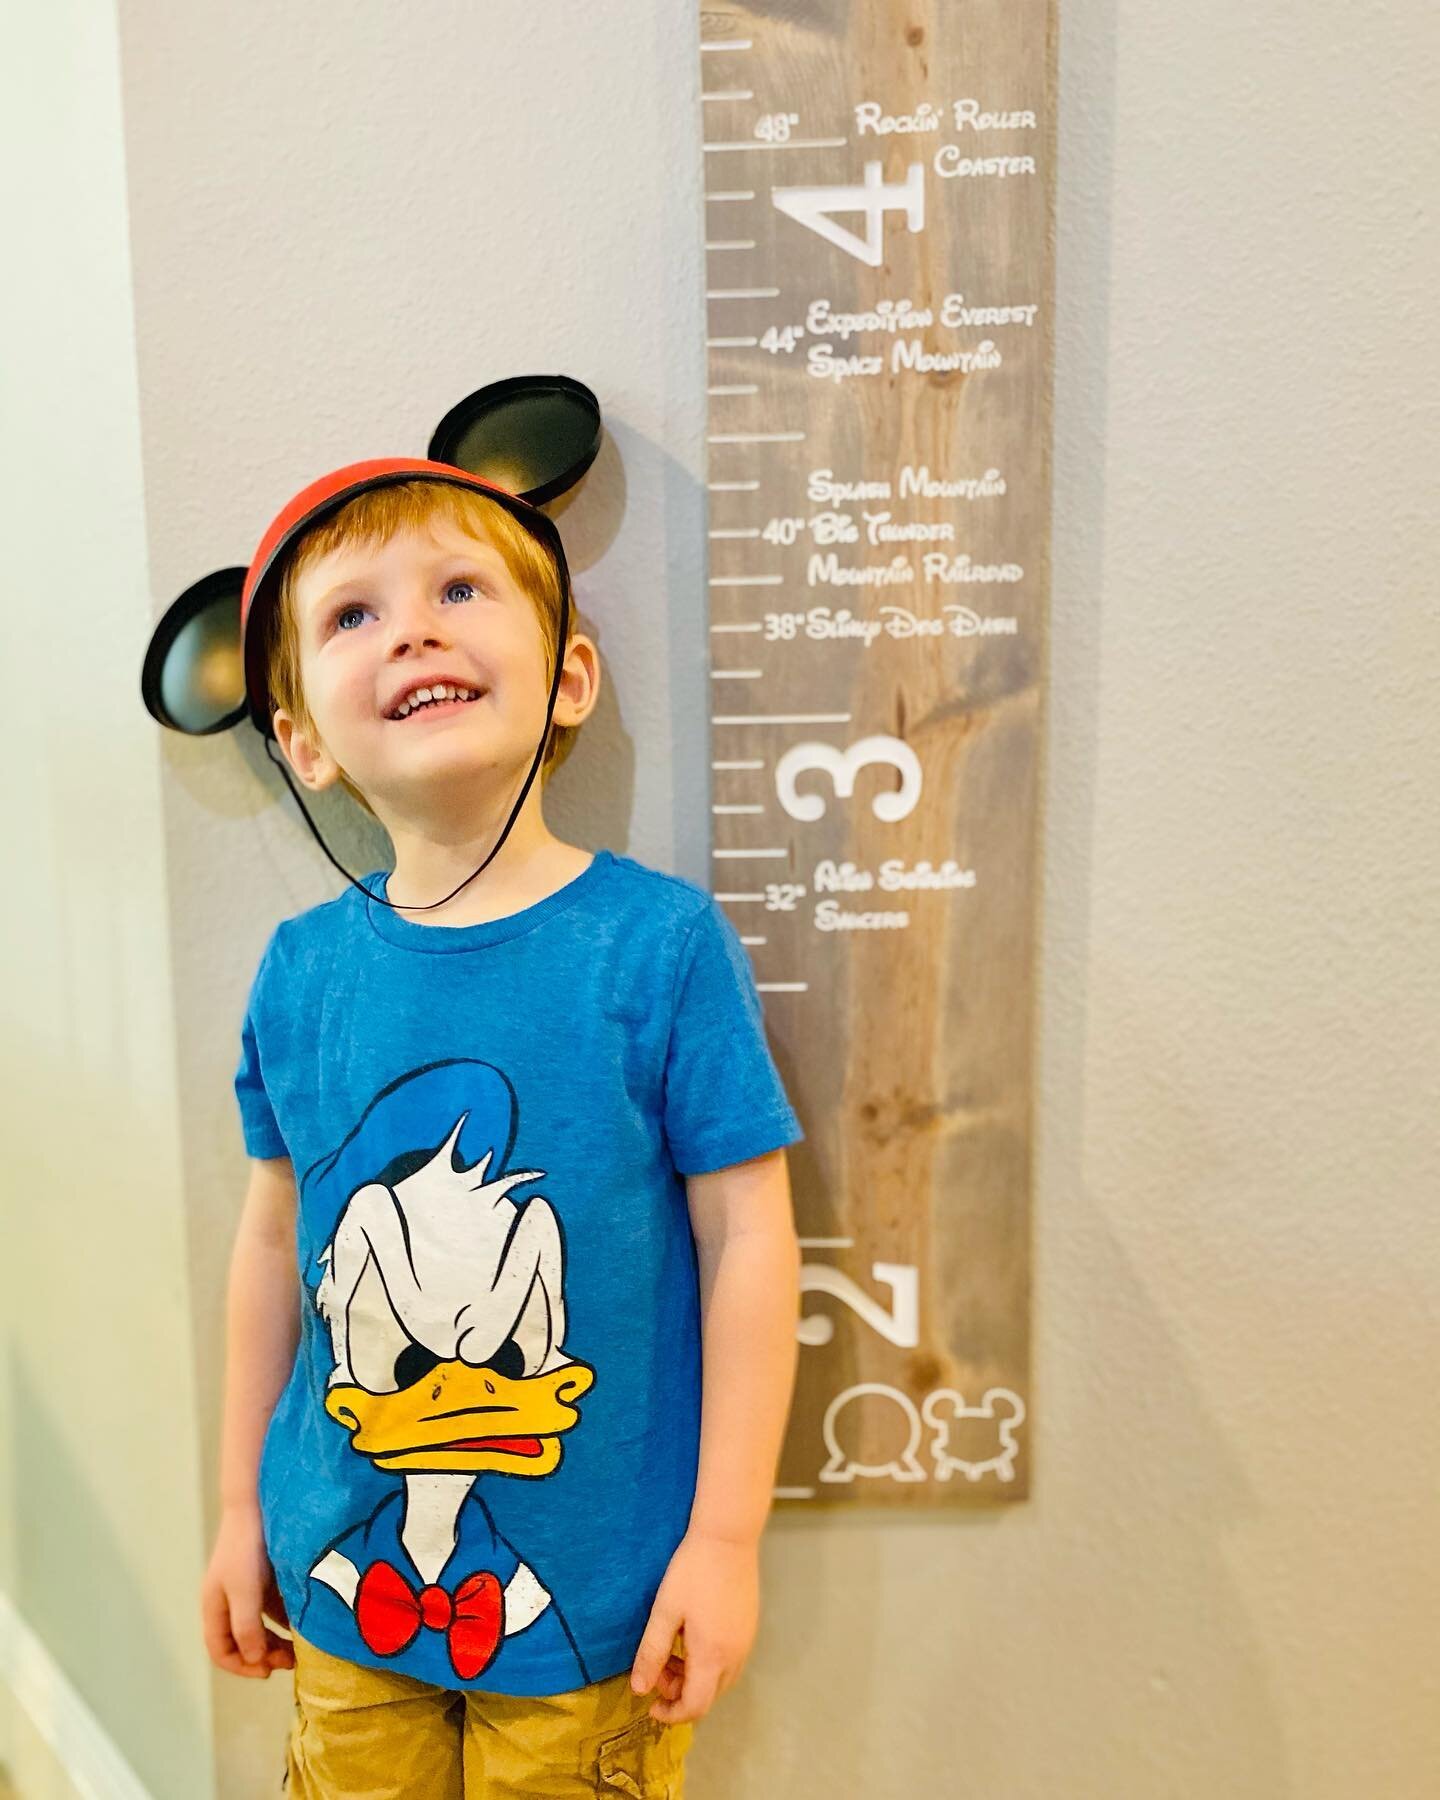 How does our latest design measure up? 📏 ✏️ 
No more marking on your door post- this growth chart ruler can move with you and even be passed down to children and grandchildren! 
You can order this in a basic version with just lines and numbers, or g